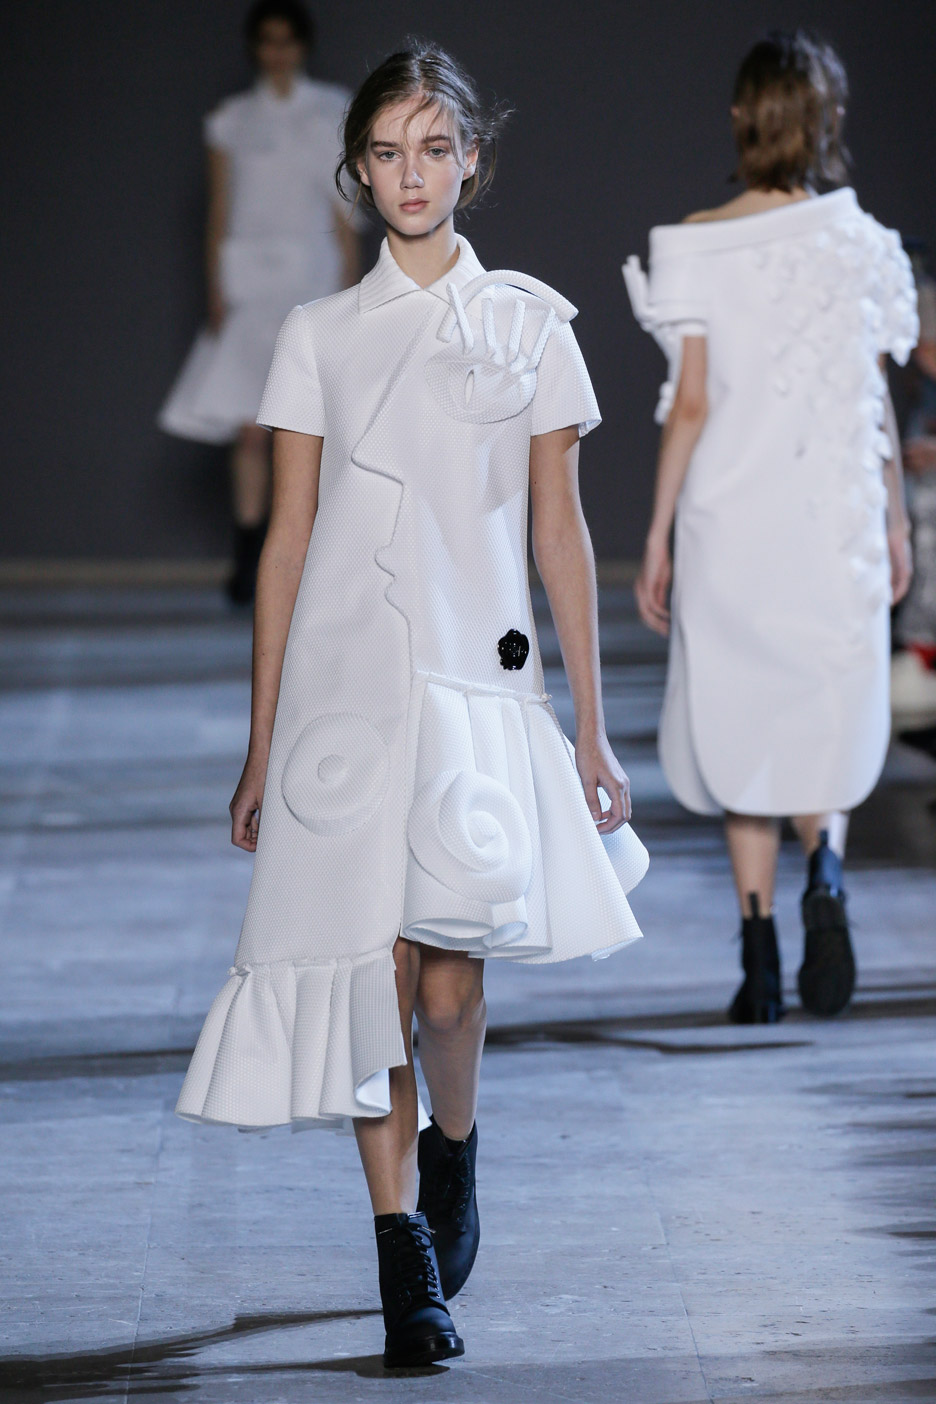 Viktor&Rolf Spring/Summer 2016 haute couture Cubist inspired collection